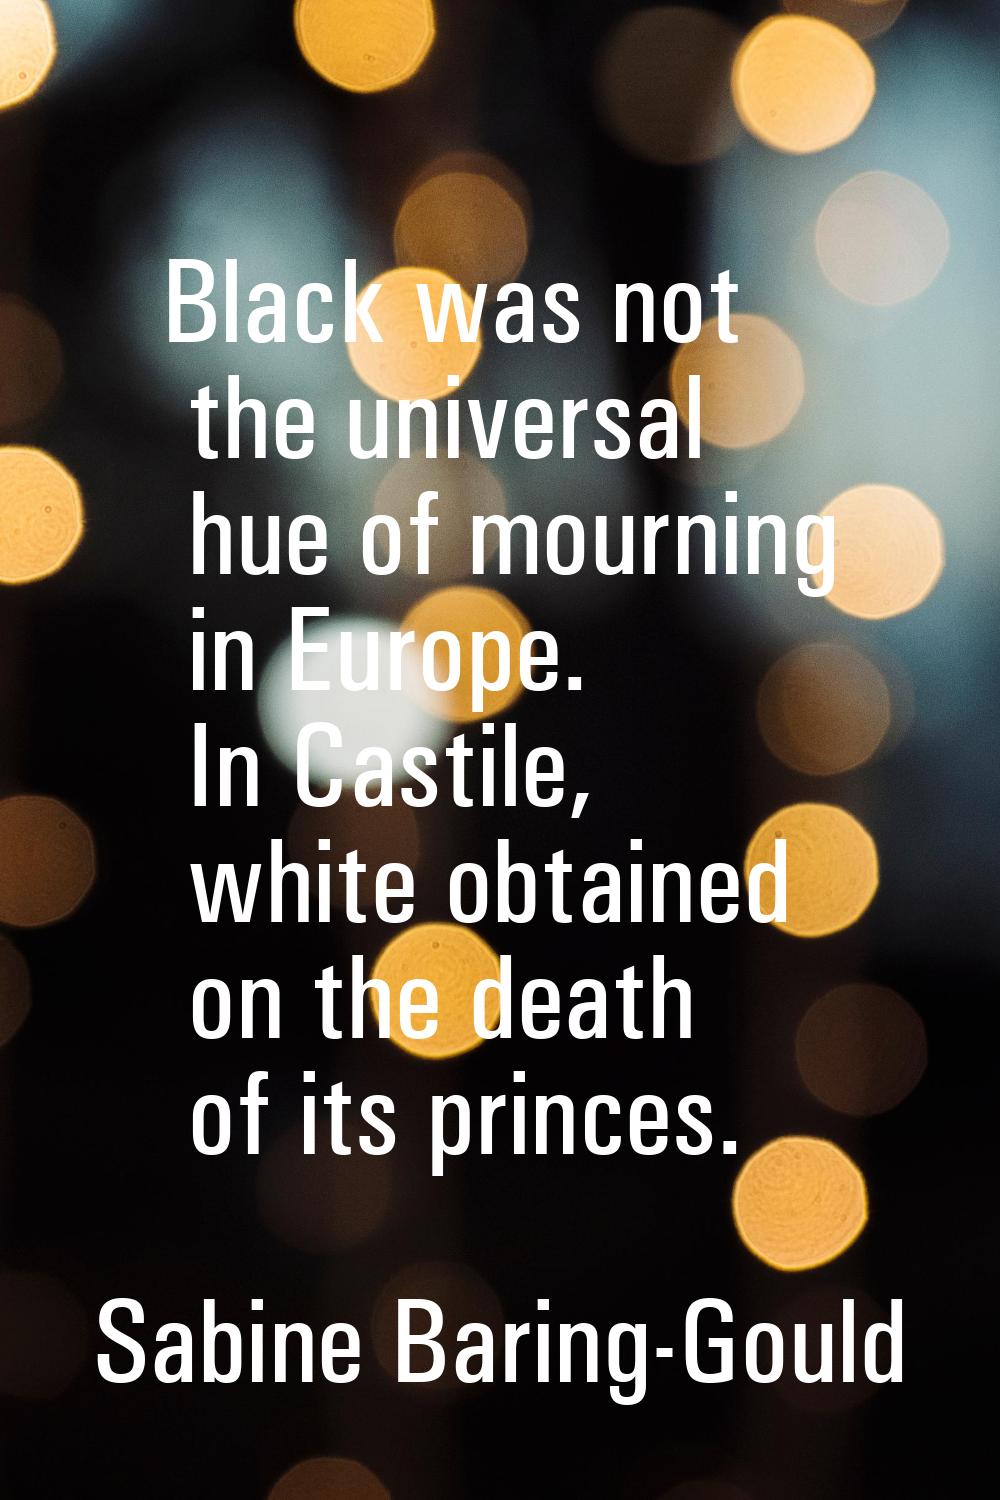 Black was not the universal hue of mourning in Europe. In Castile, white obtained on the death of i